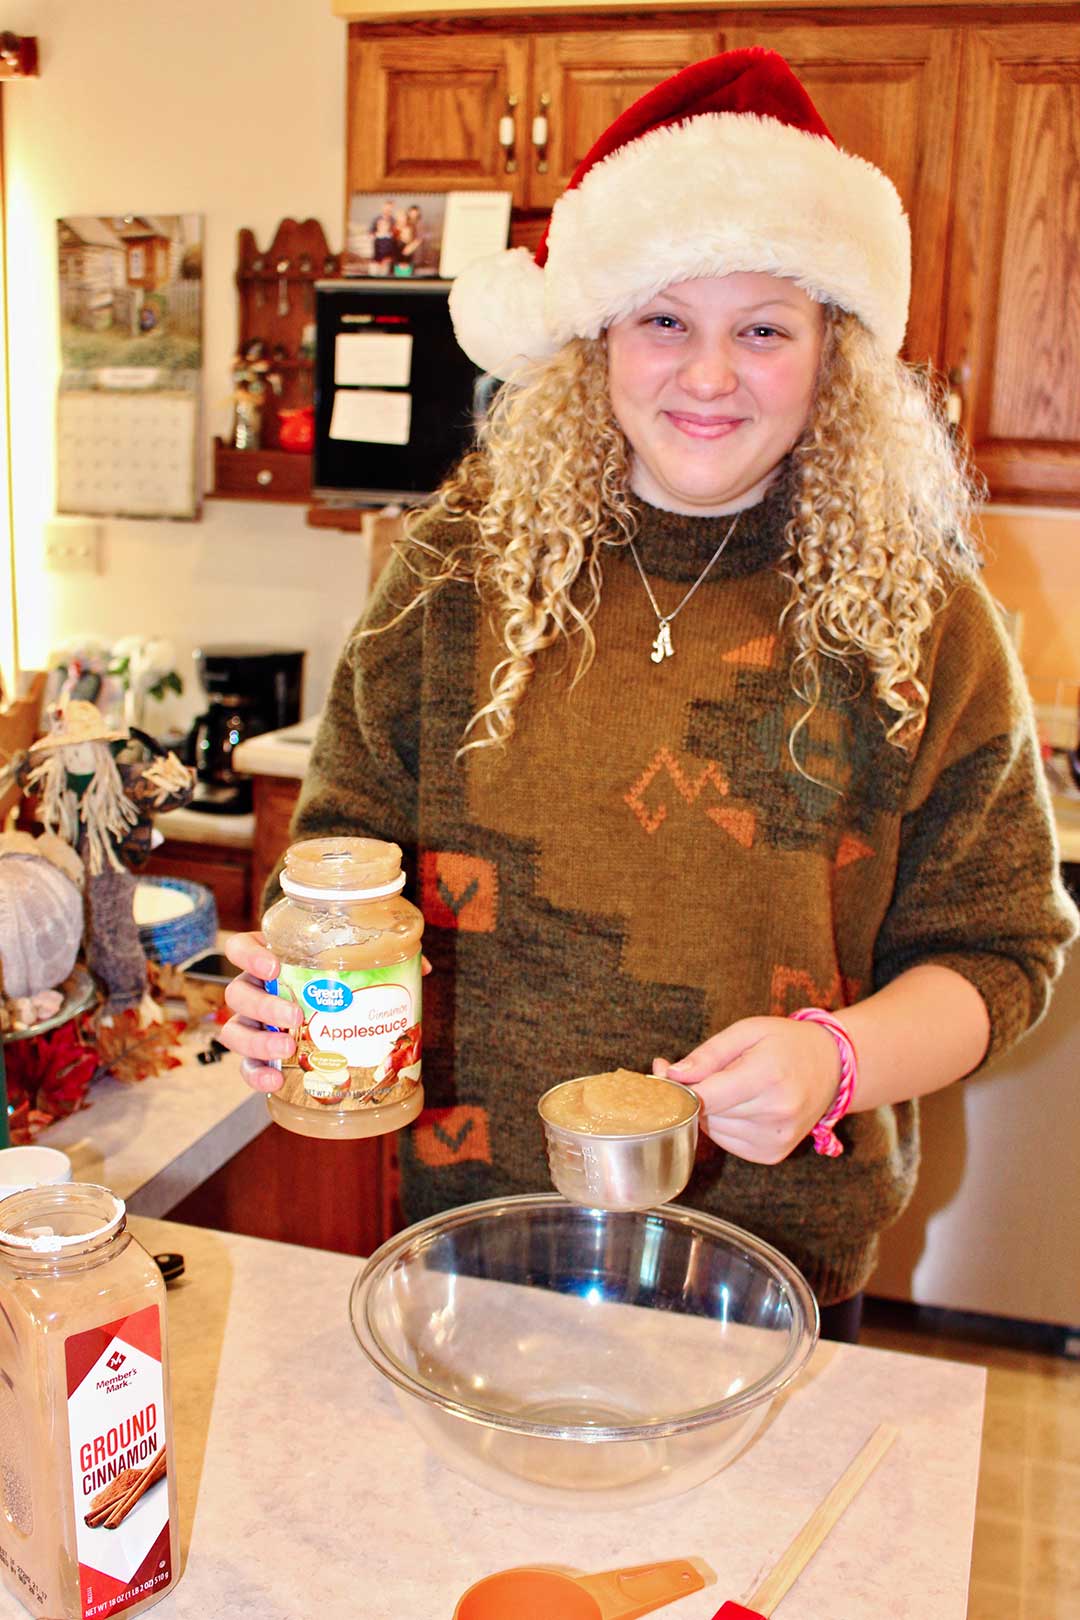 Girl with curly blonde hair and wearing a Santa hat holds a measuring cup of applesauce over a glass bowl.